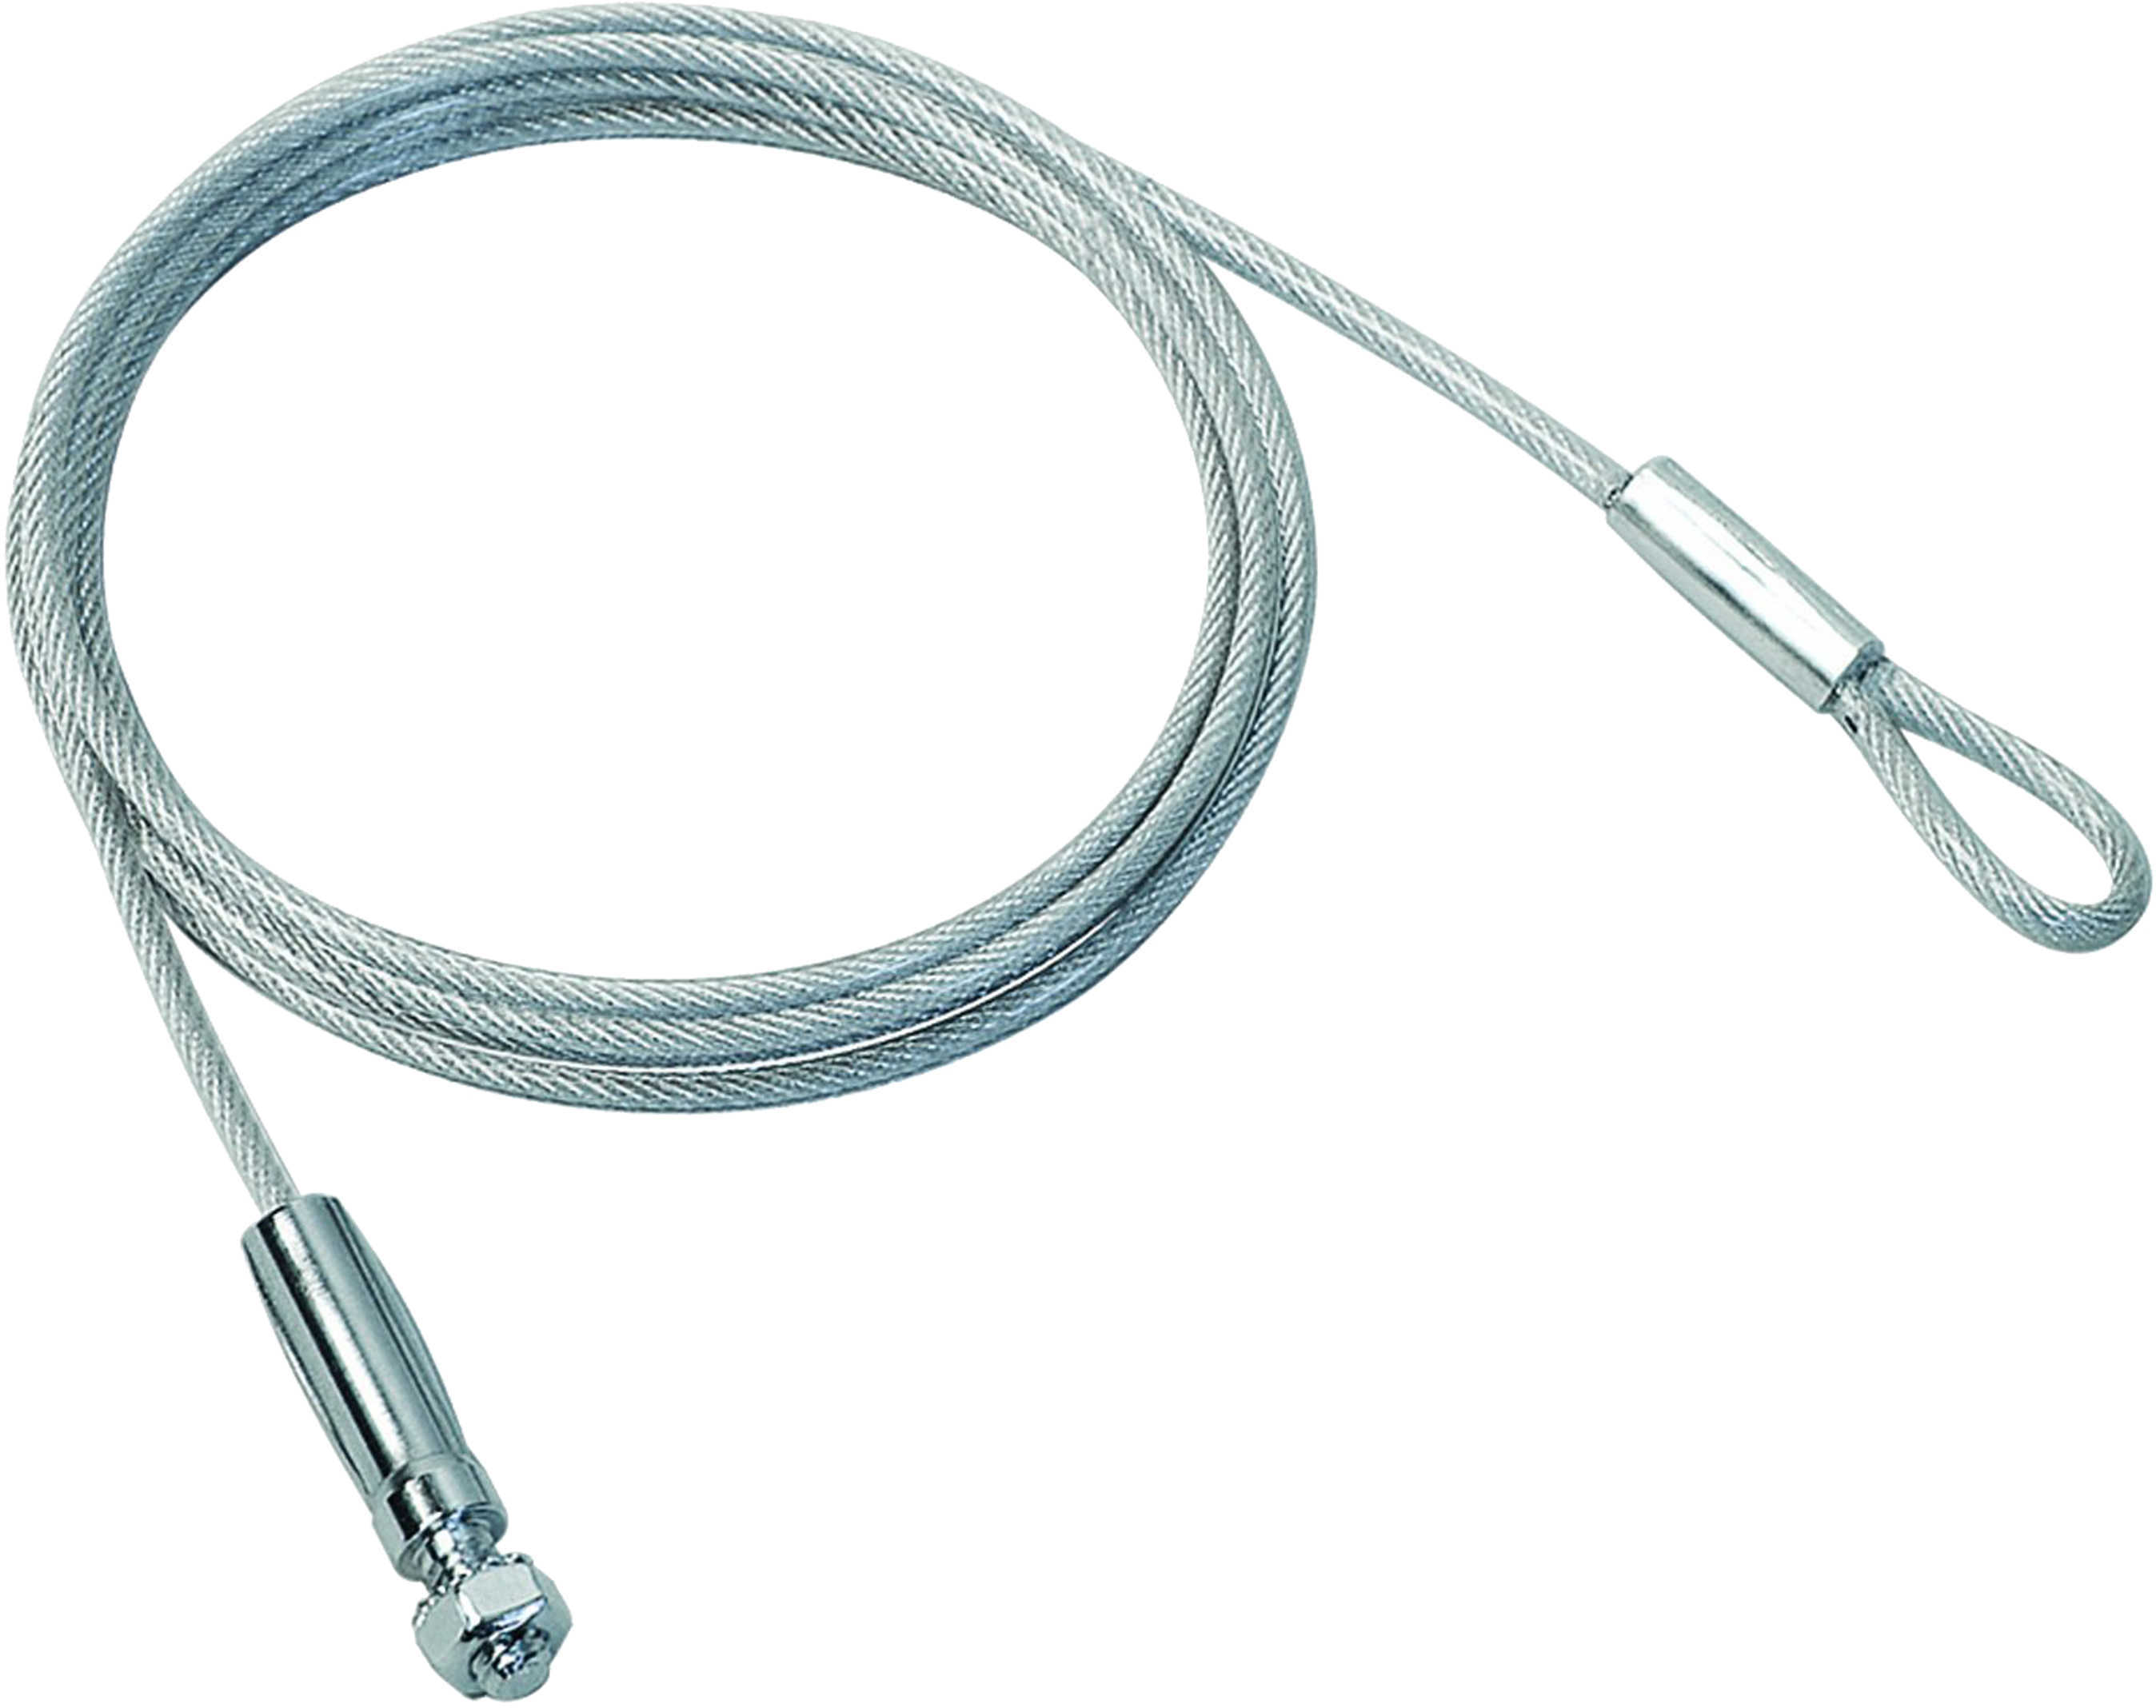 Gunvault 6' Security Cable